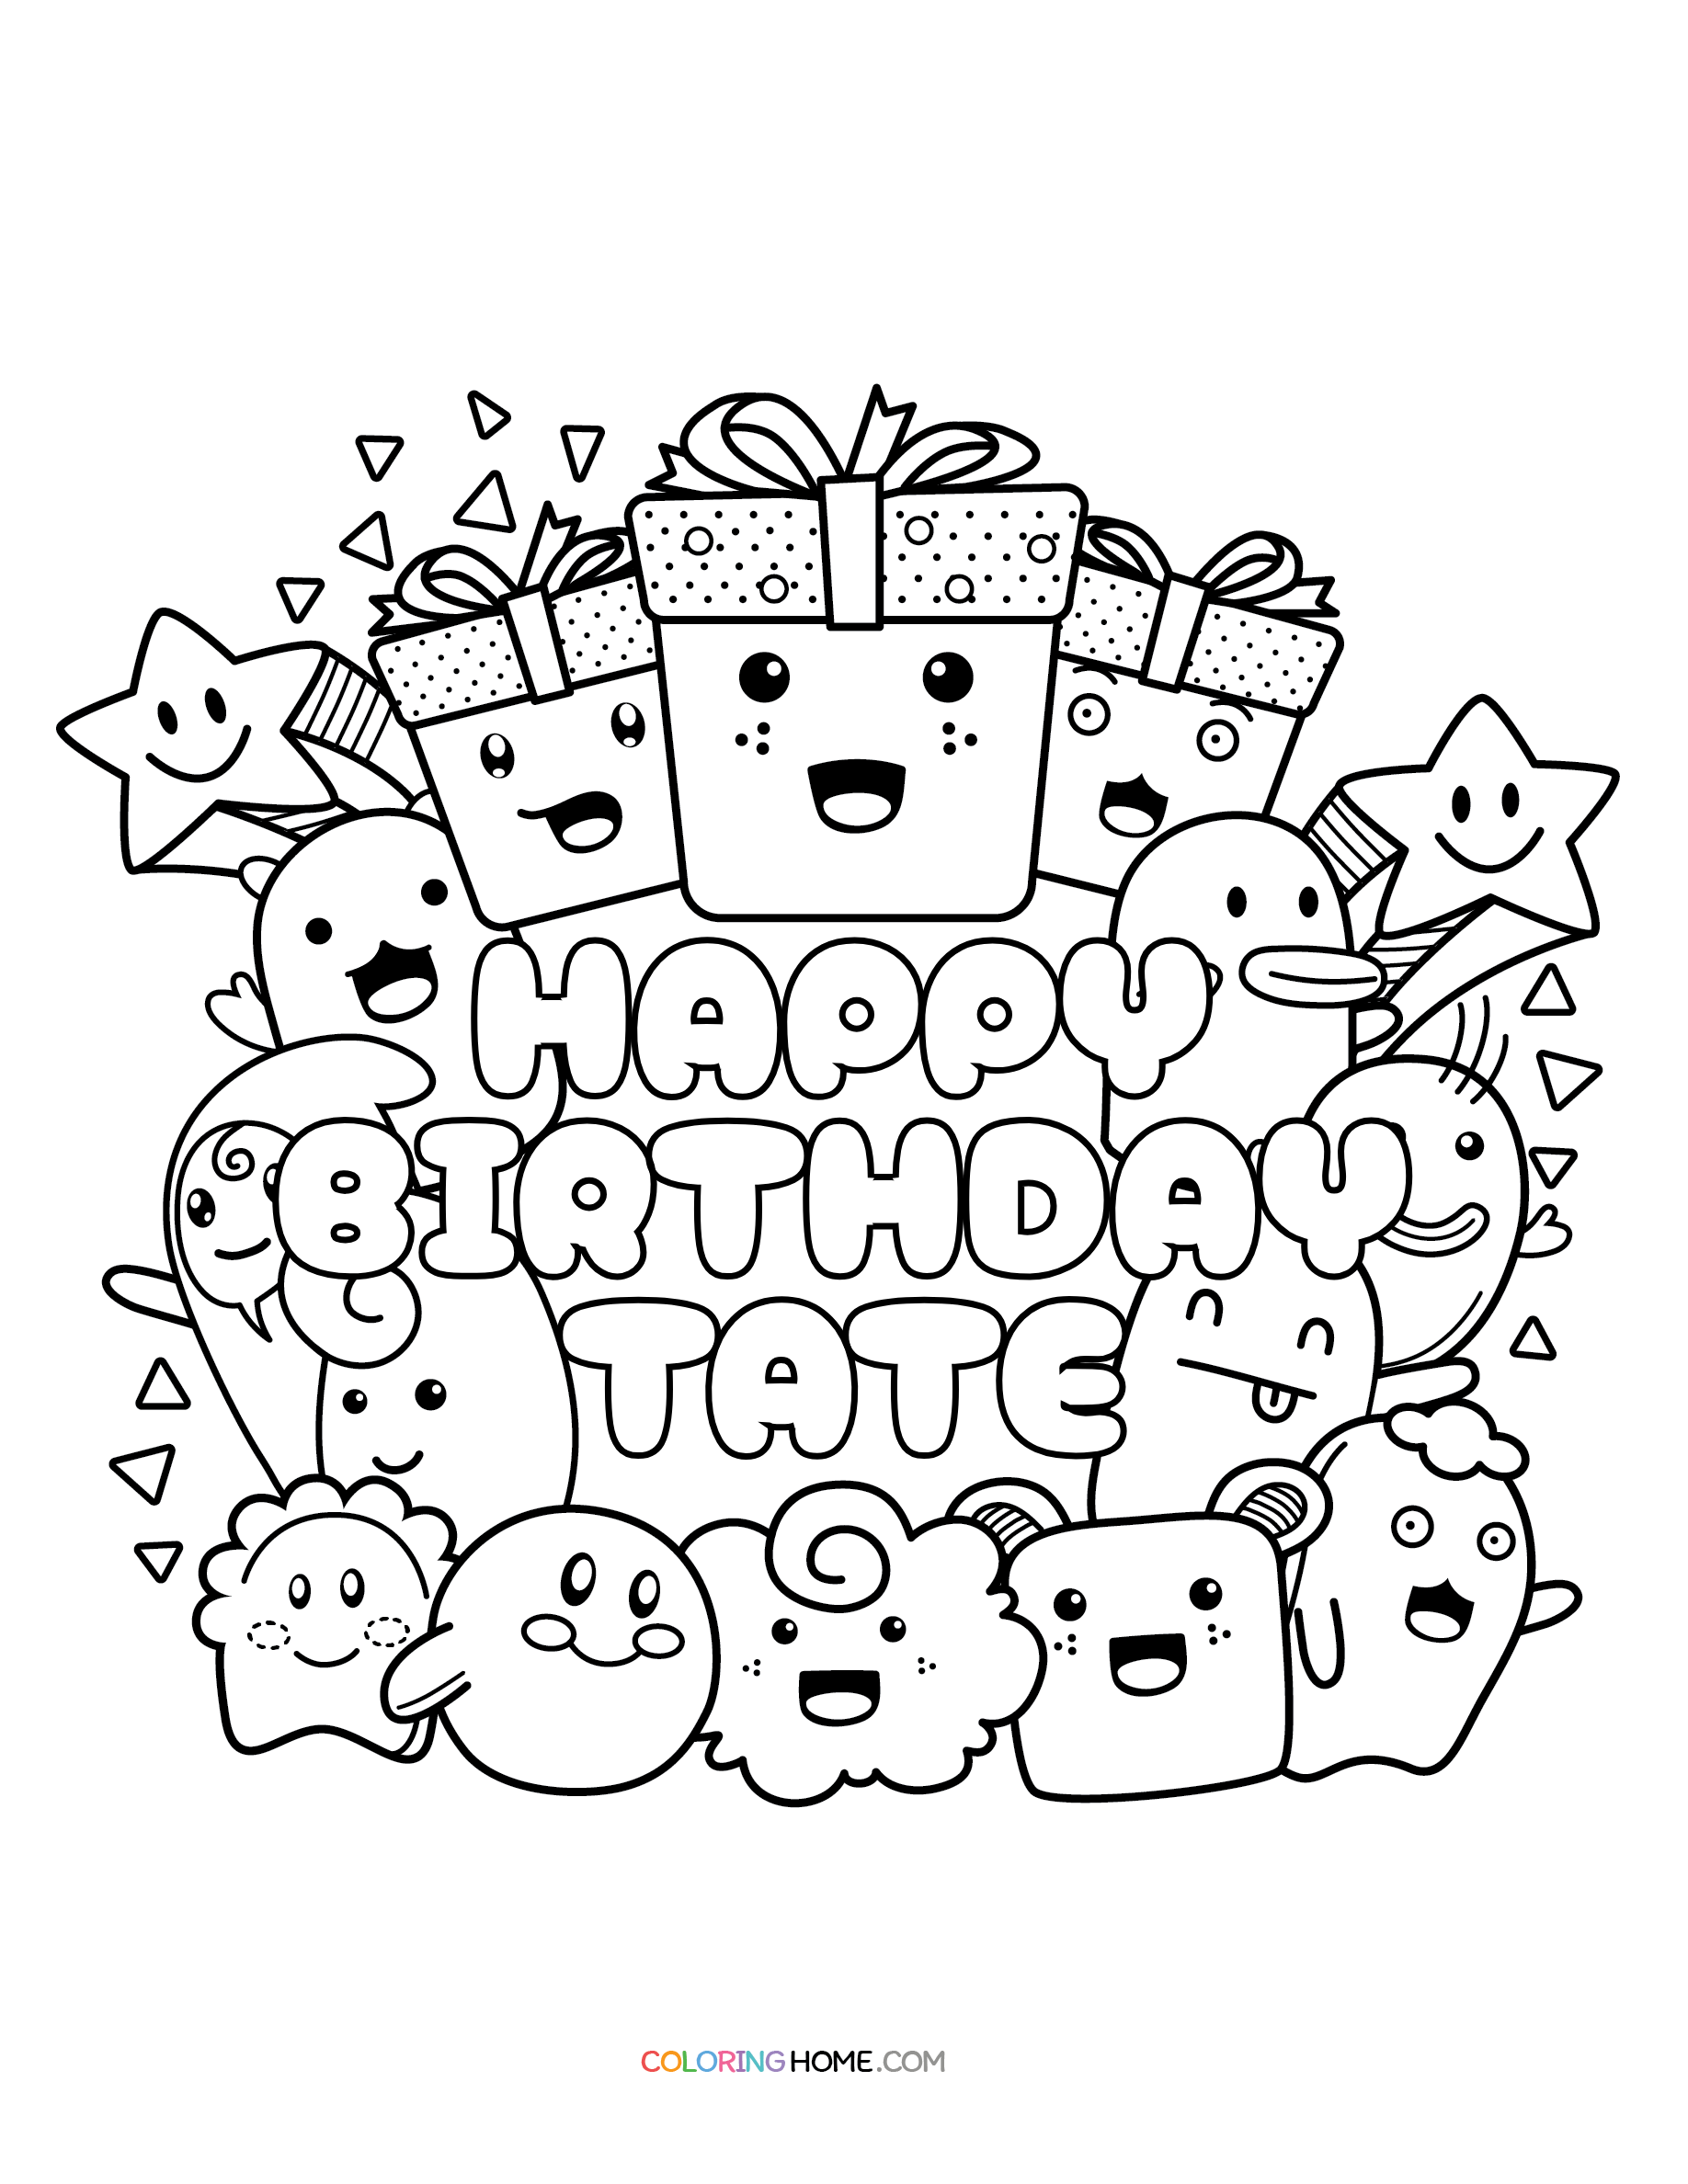 Happy Birthday Tate coloring page